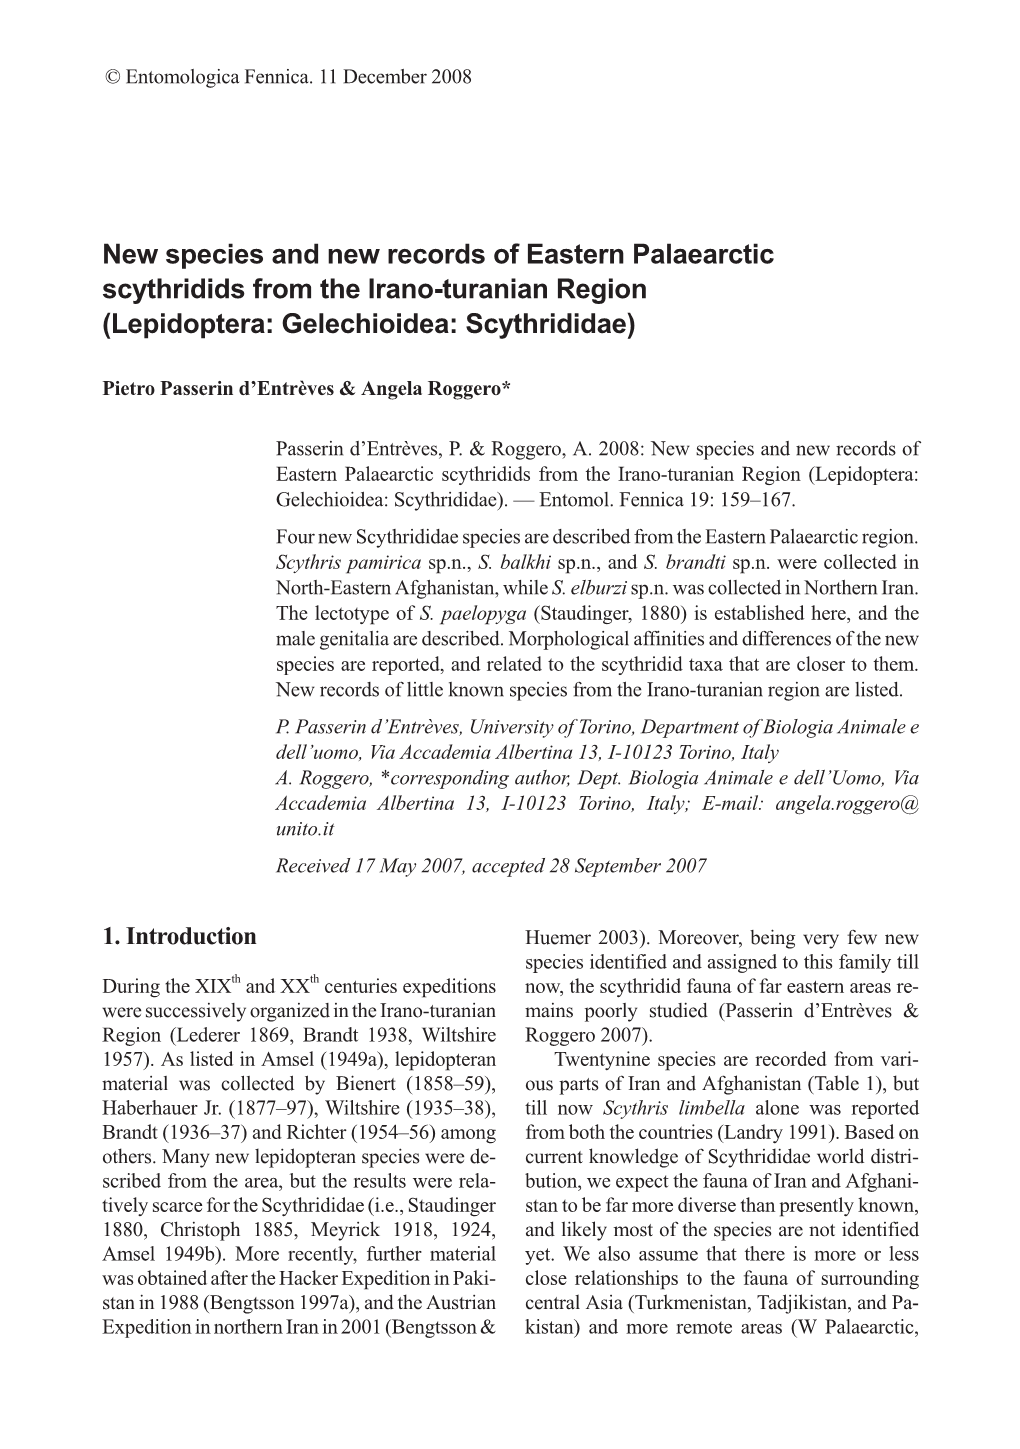 New Species and New Records of Eastern Palaearctic Scythridids from the Irano-Turanian Region (Lepidoptera: Gelechioidea: Scythrididae)